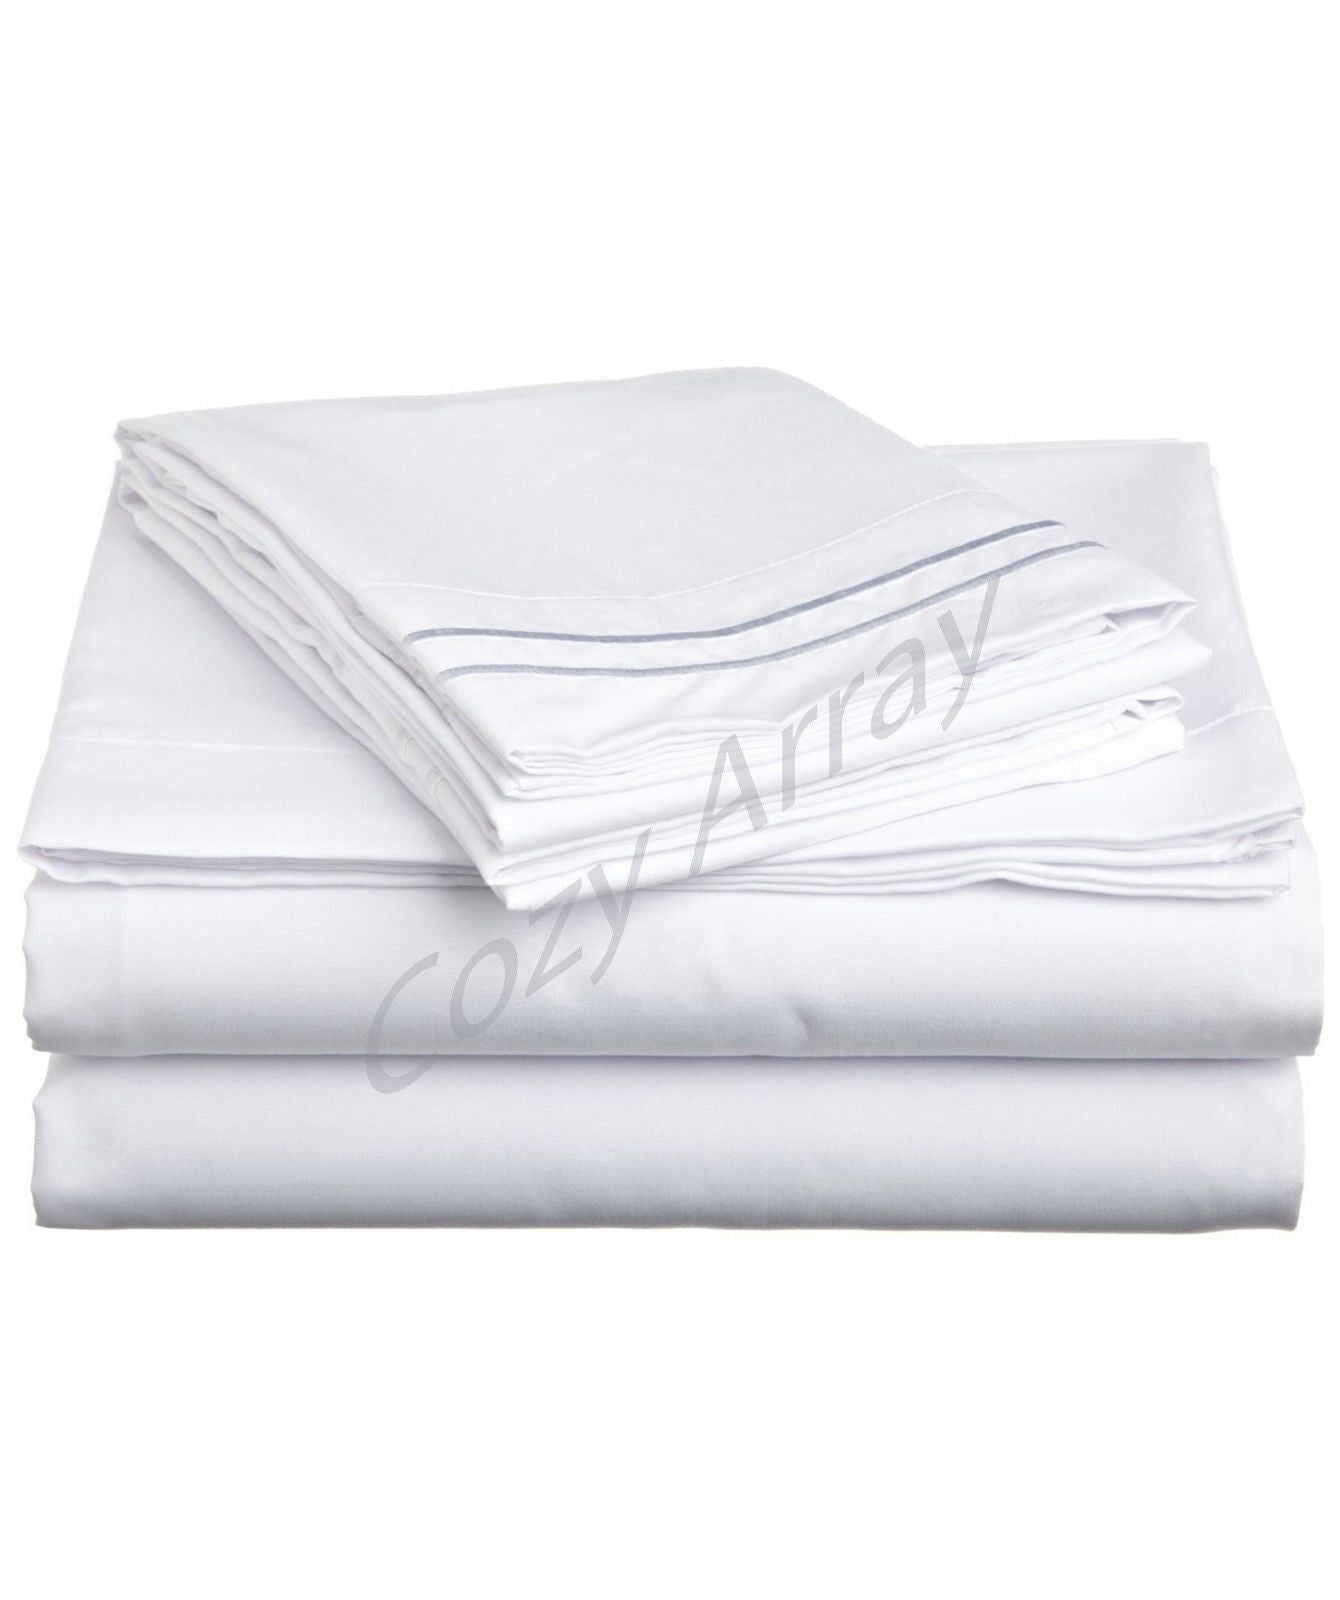 Bed Sheets - Deep Pocket Bed Sheets Set - Soft King Queen Twin Full California King - King / White